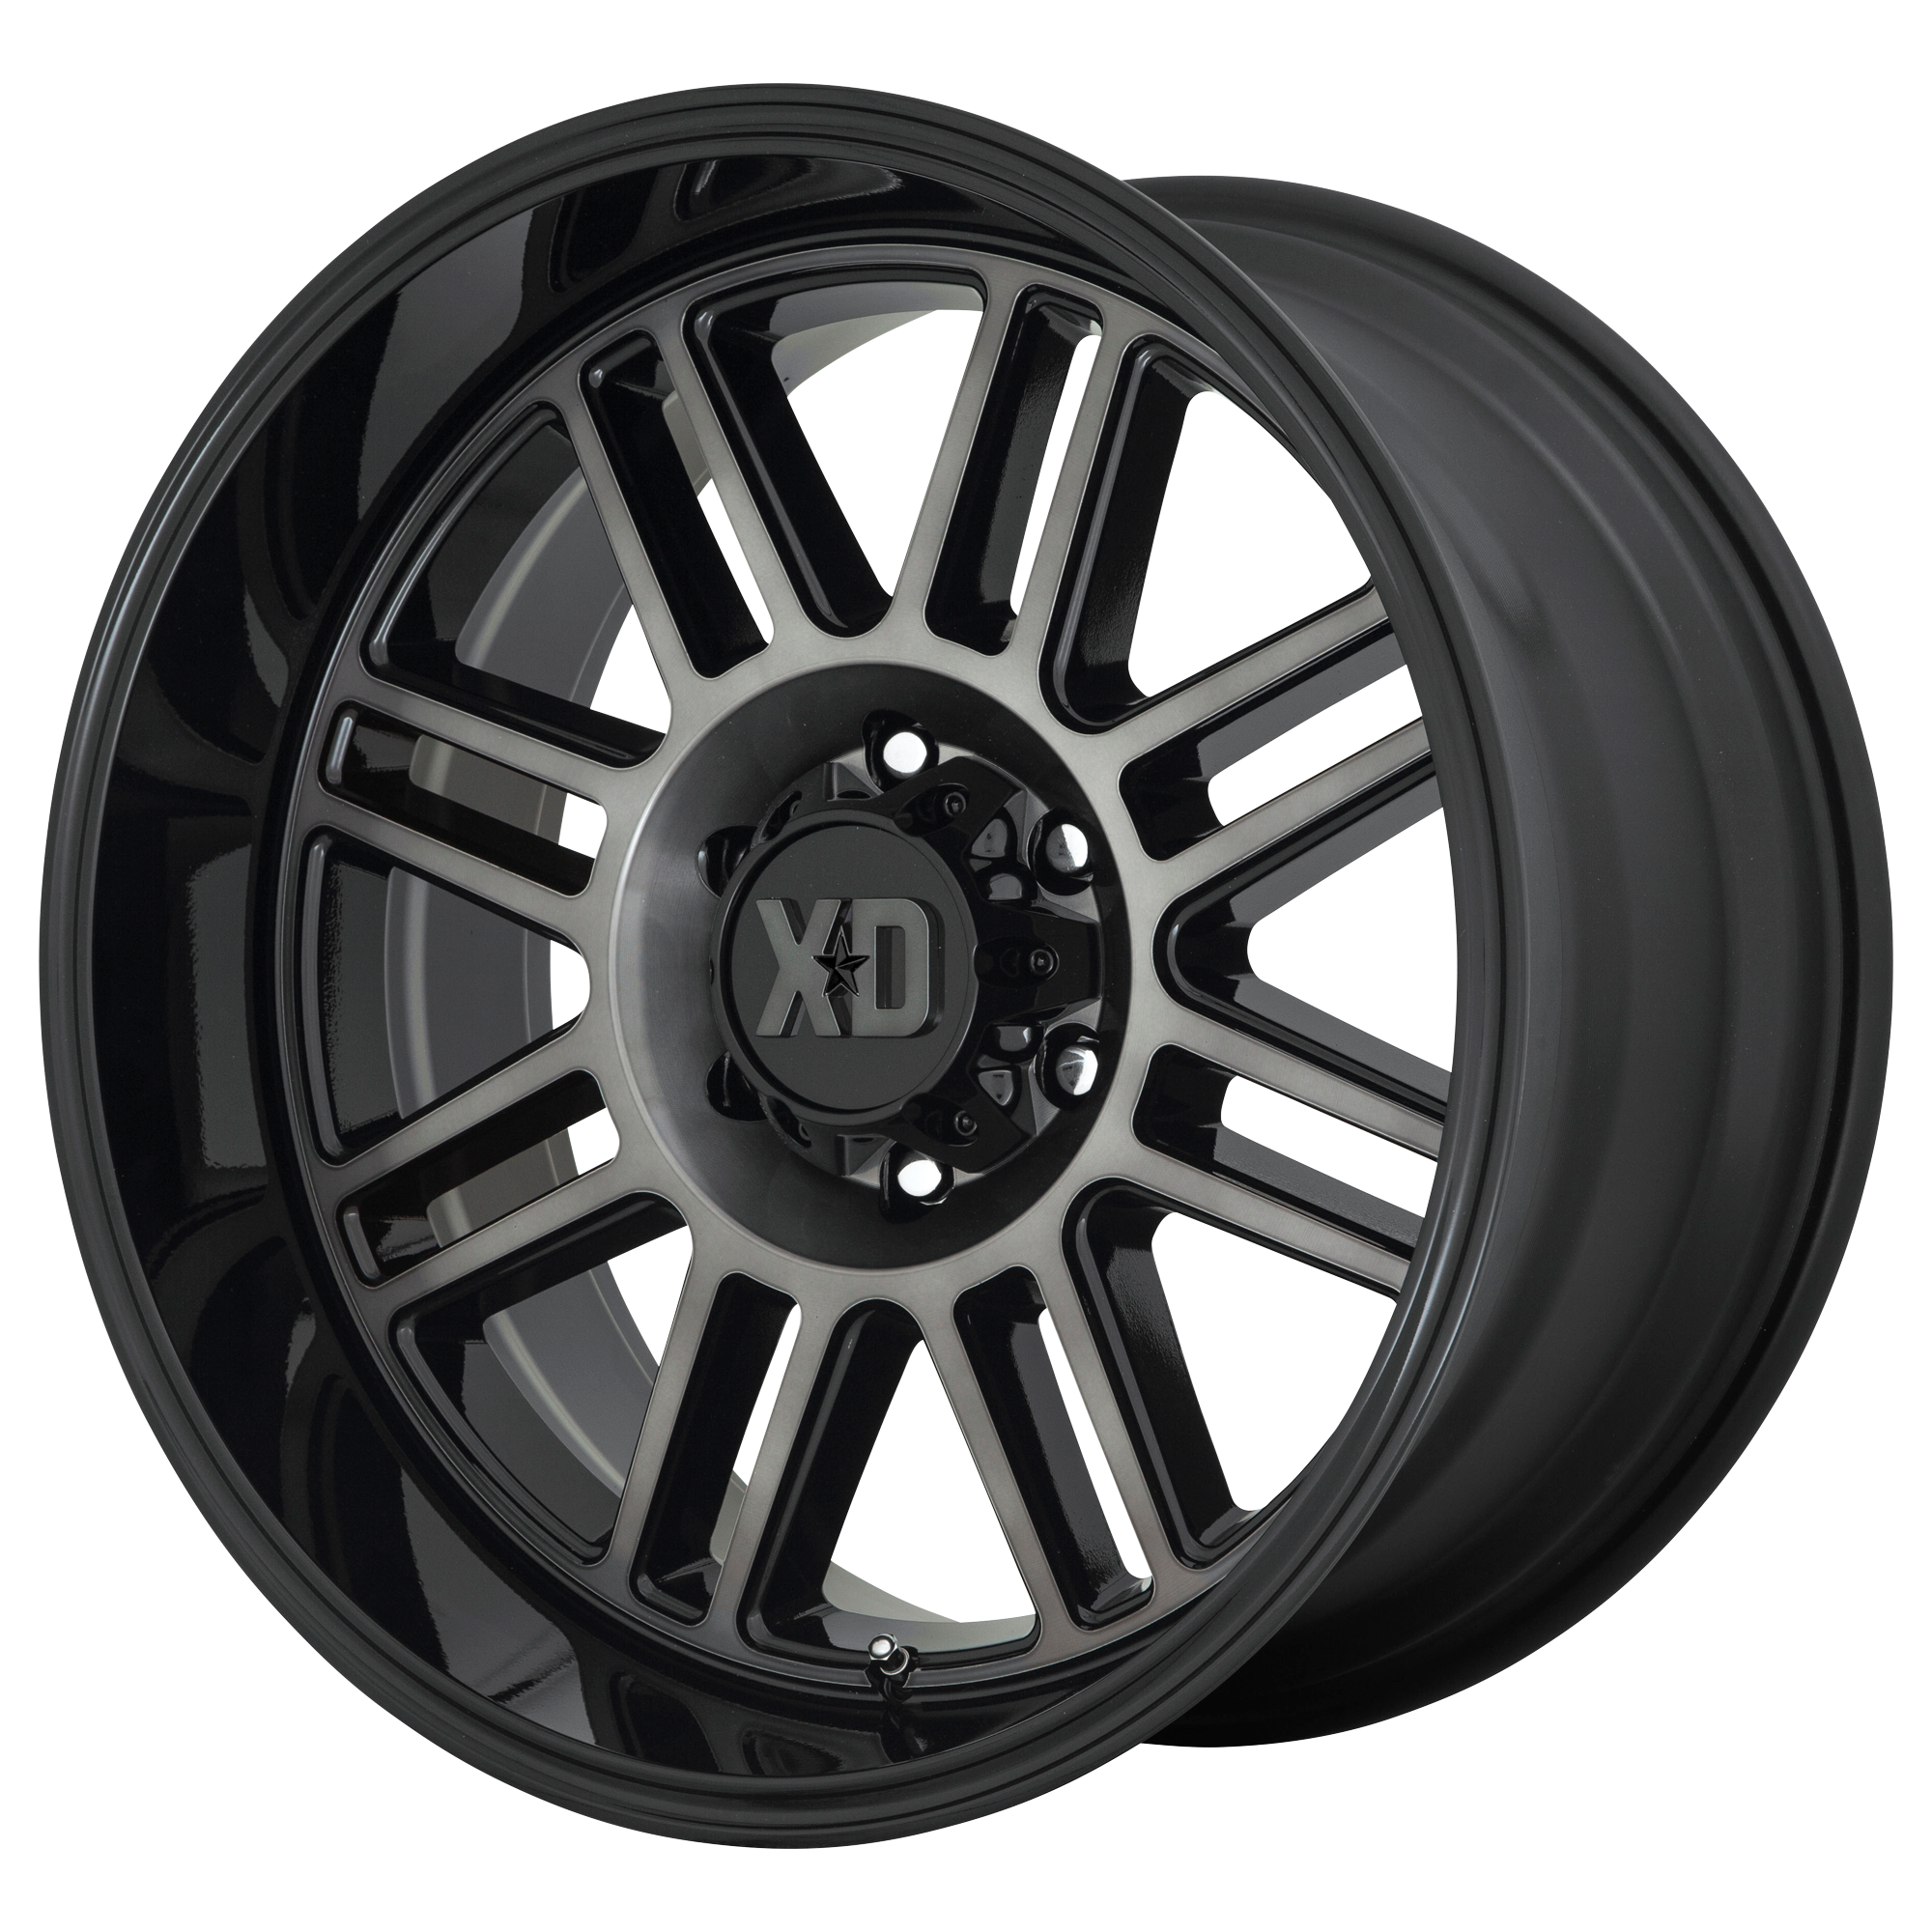 CAGE 20x9 6x135.00 GLOSS BLACK W/ GRAY TINT (0 mm) - Tires and Engine Performance